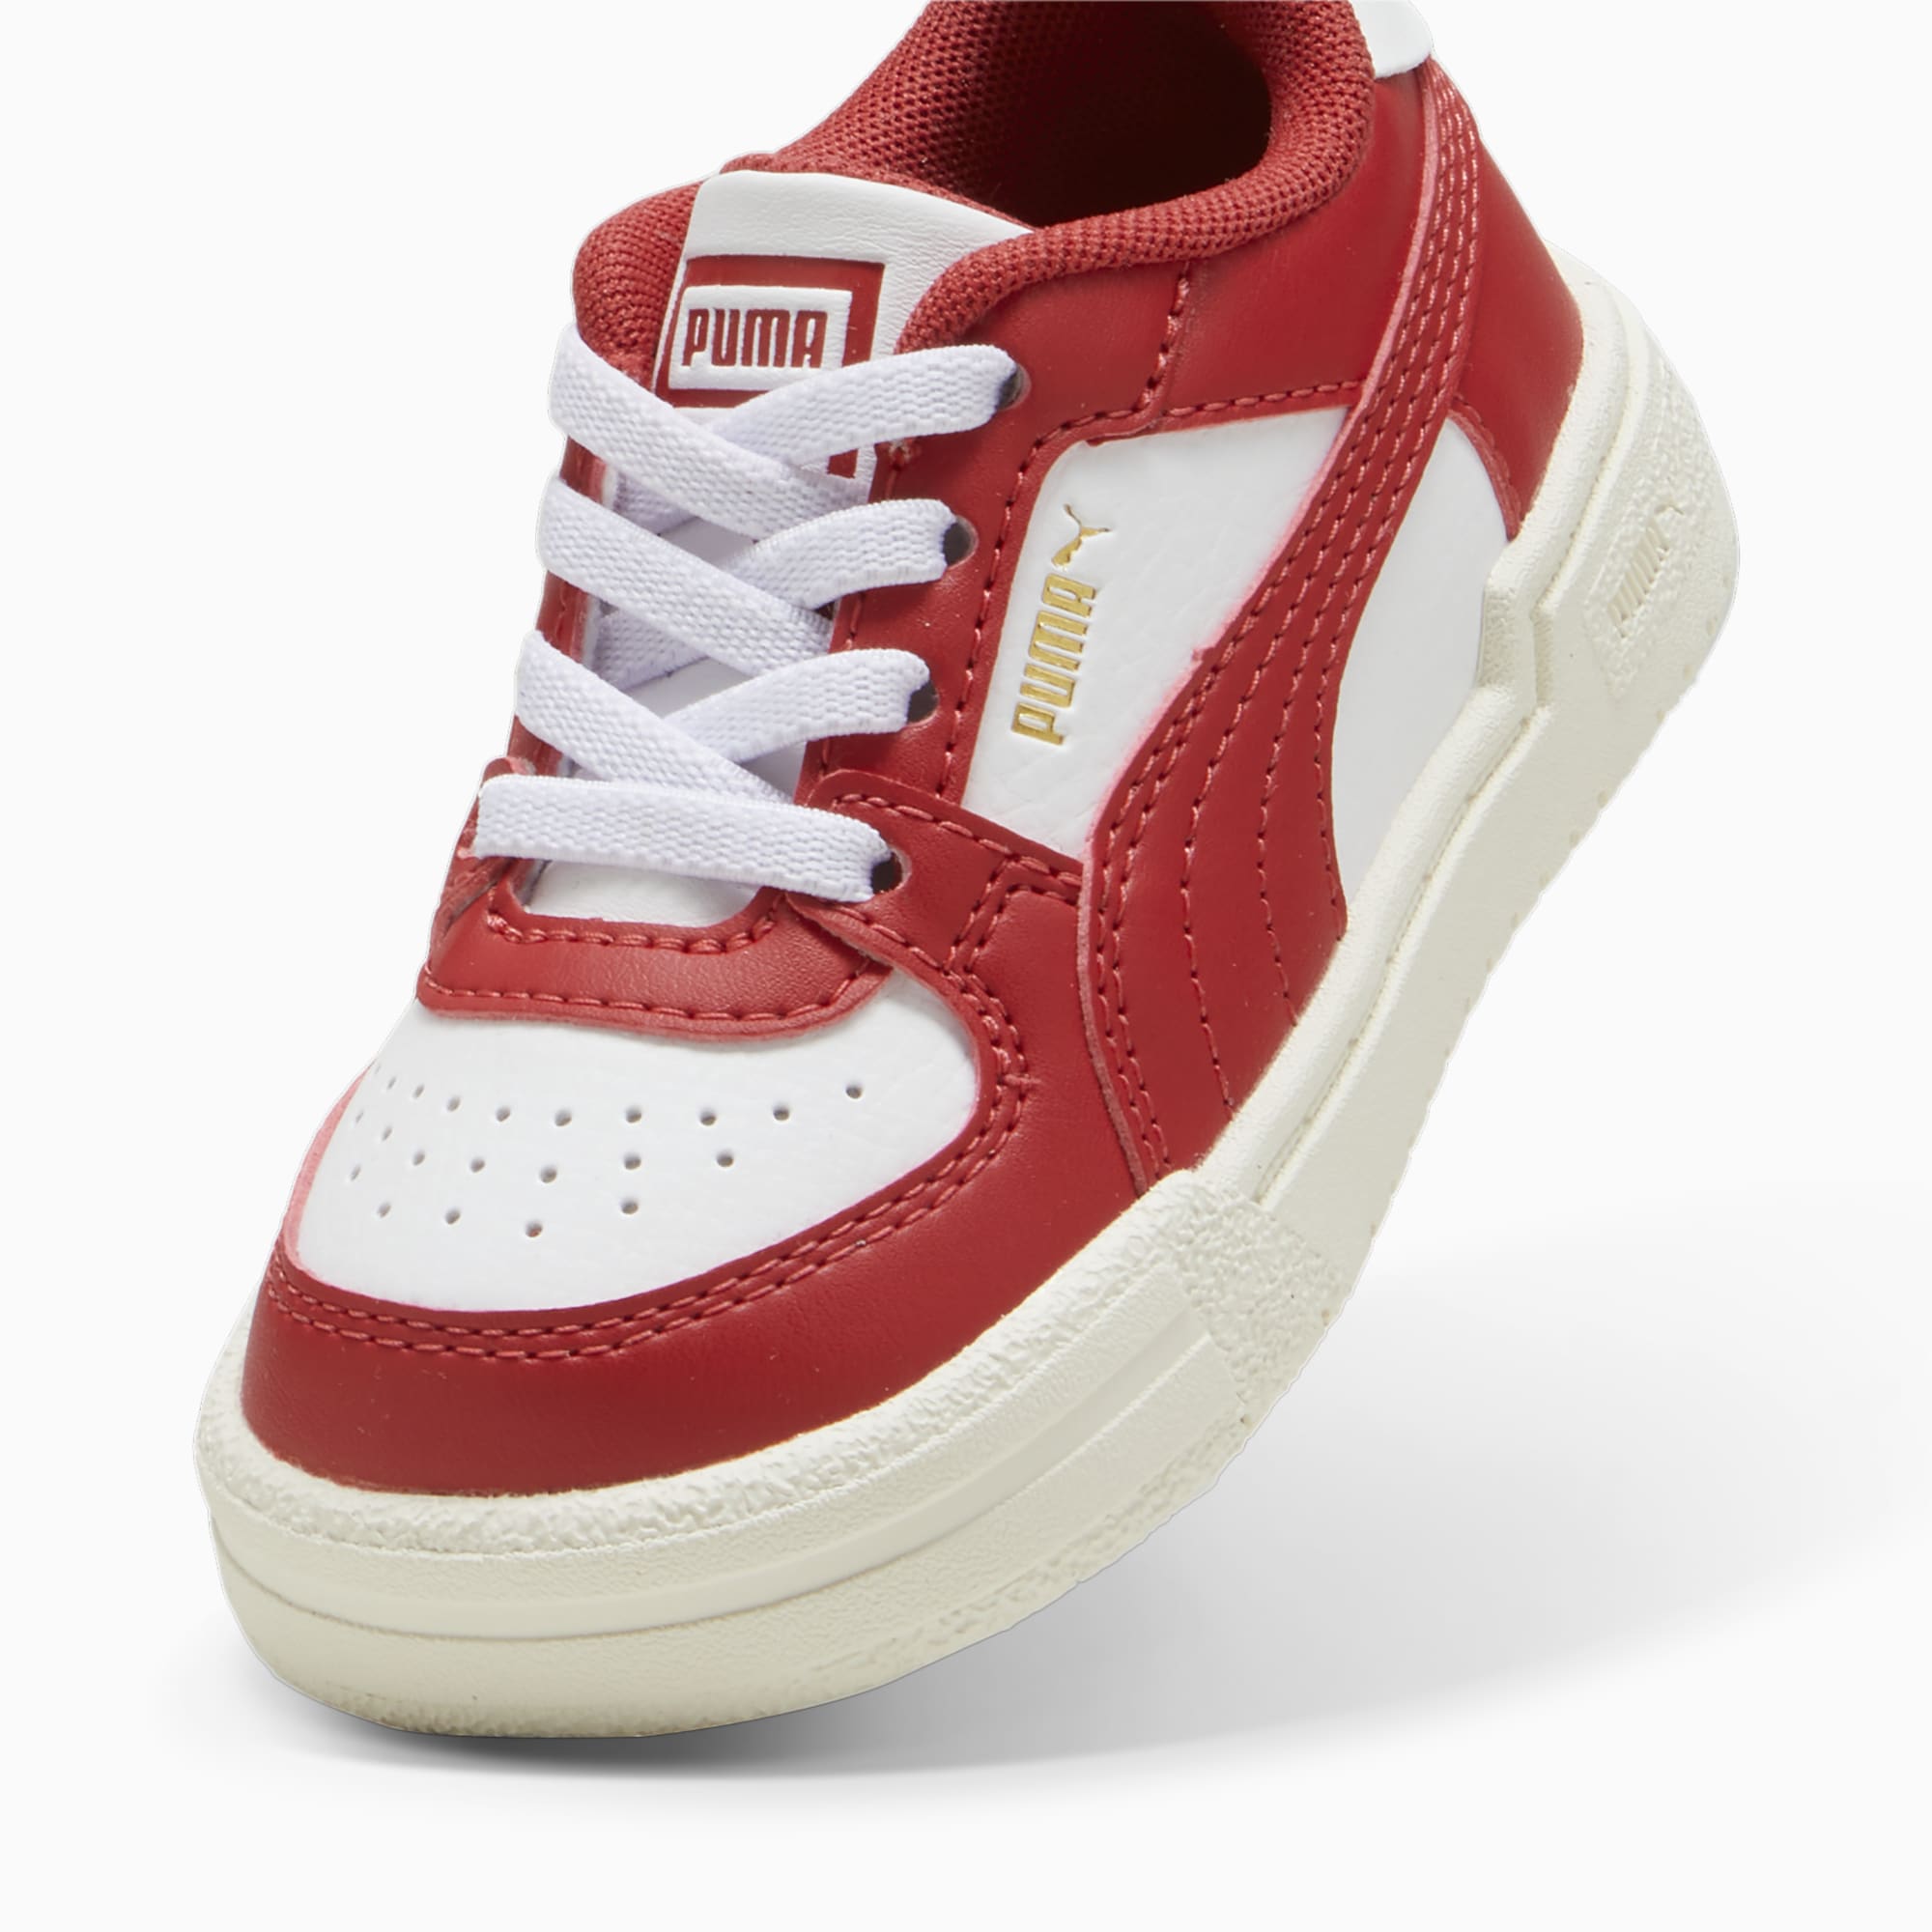 PUMA Ca Pro Classic AC Babies' Trainers, White/Club Red, Size 19, Shoes